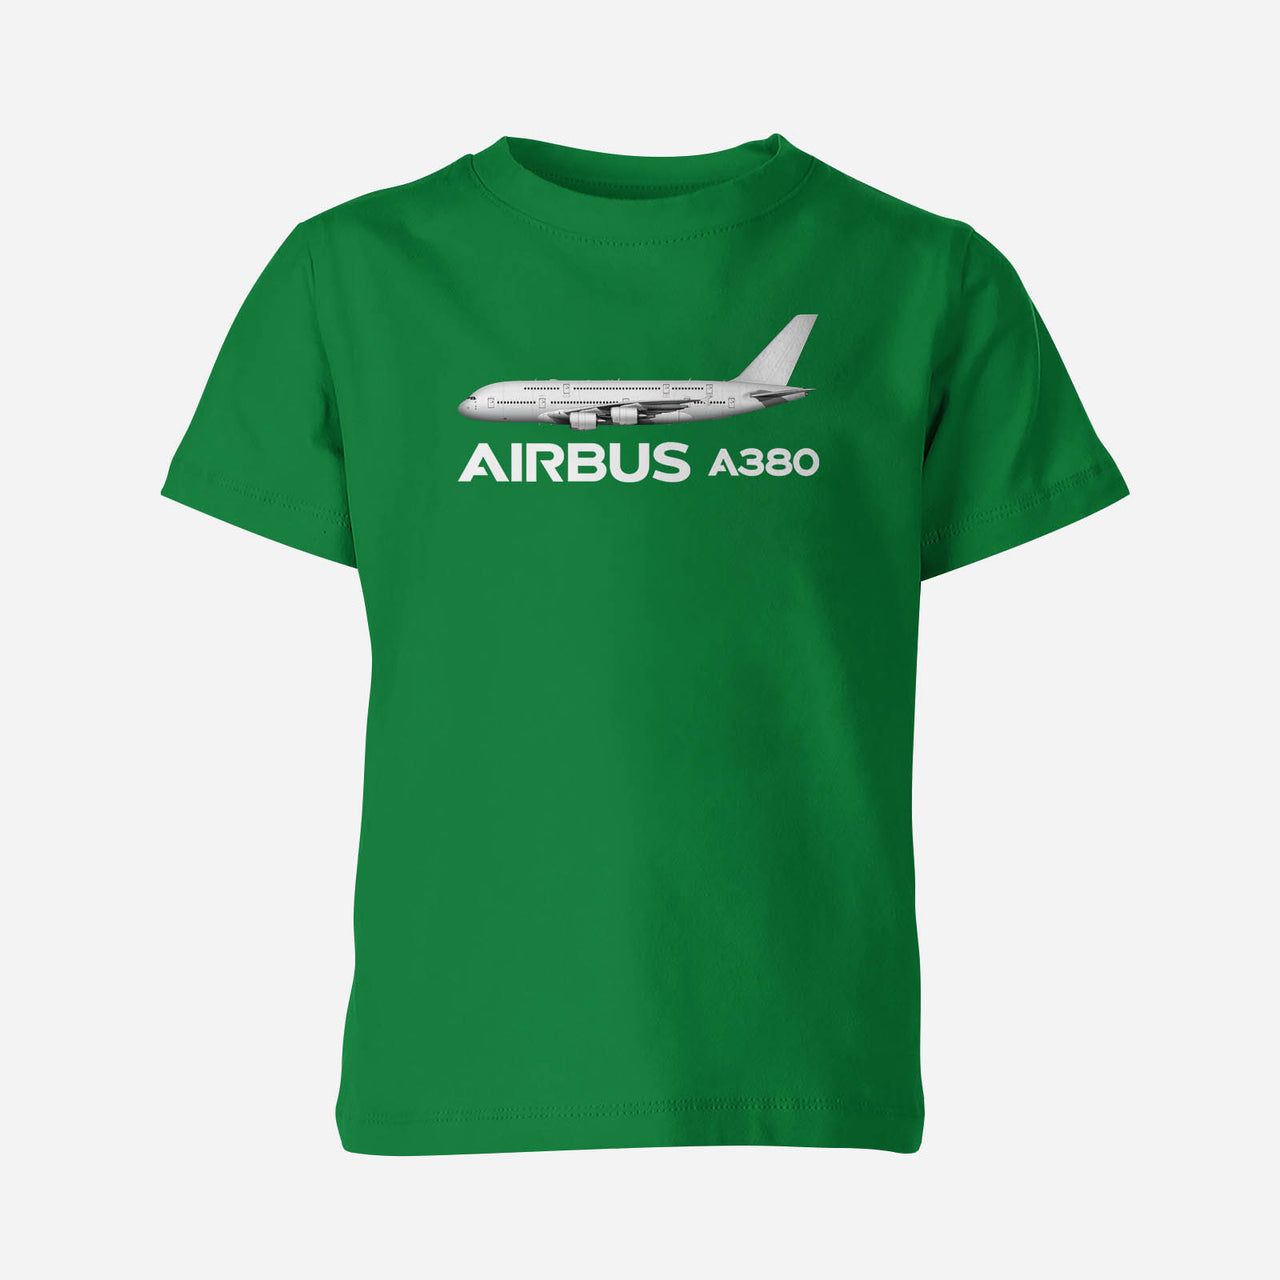 The Airbus A380 Designed Children T-Shirts